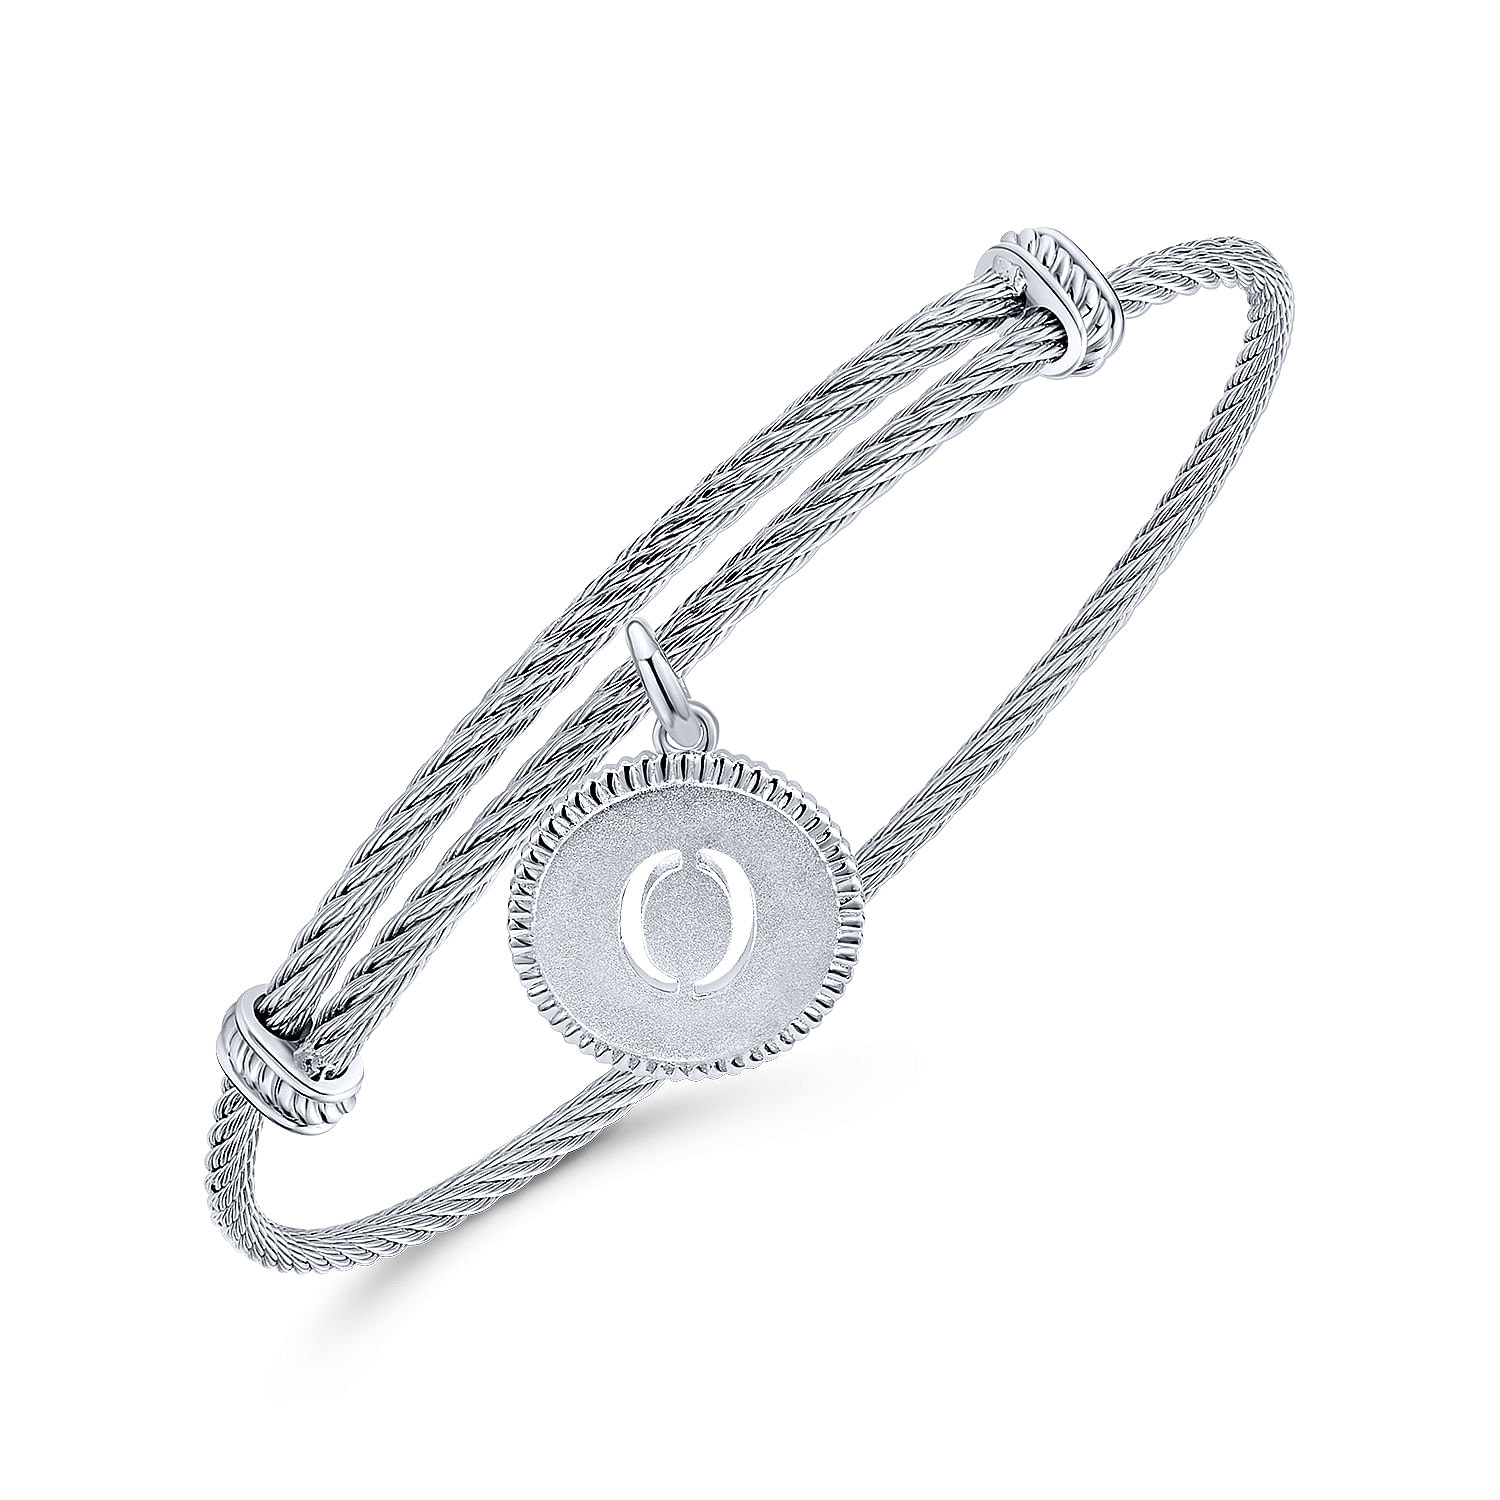 Adjustable Twisted Cable Stainless Steel Bangle with Sterling Silver O Initial Charm - Shot 2